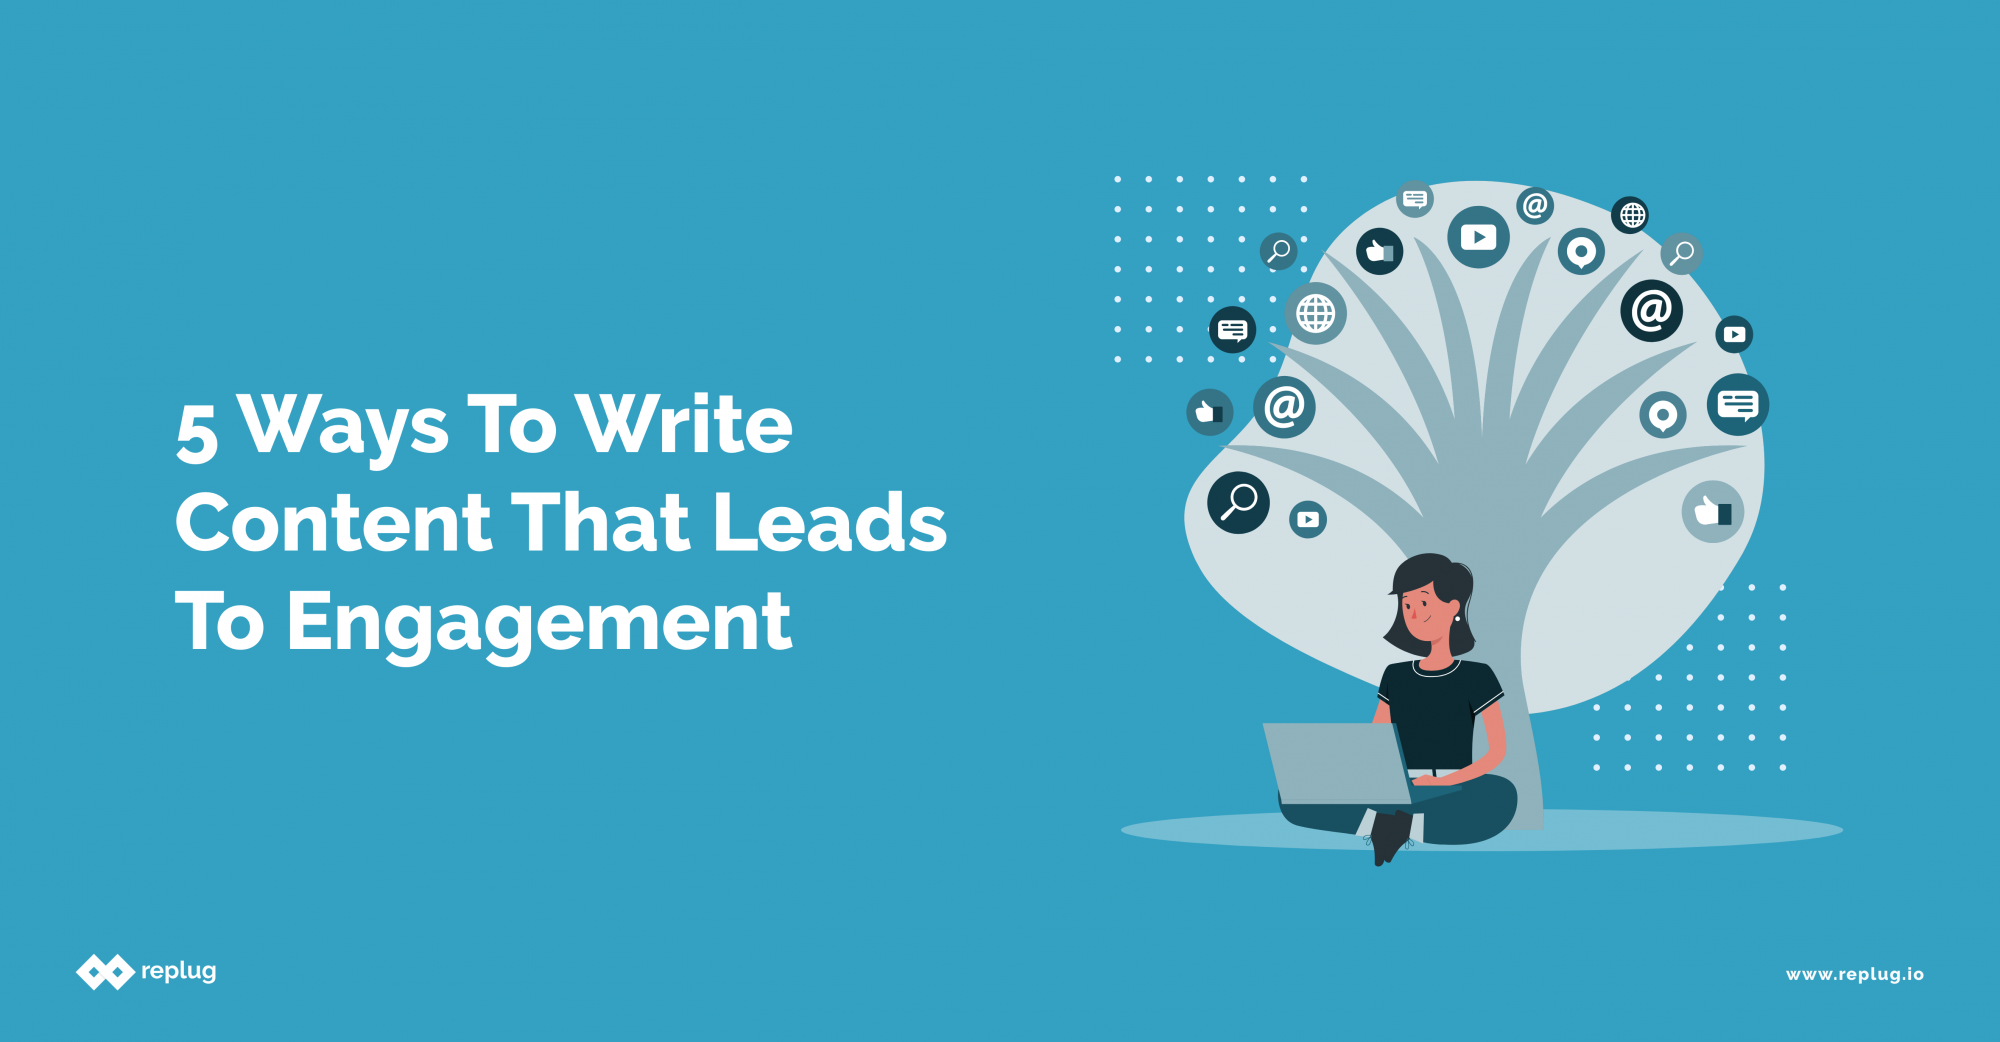 5 Ways to Write Content that Leads to Engagement - Other Popular Blogs